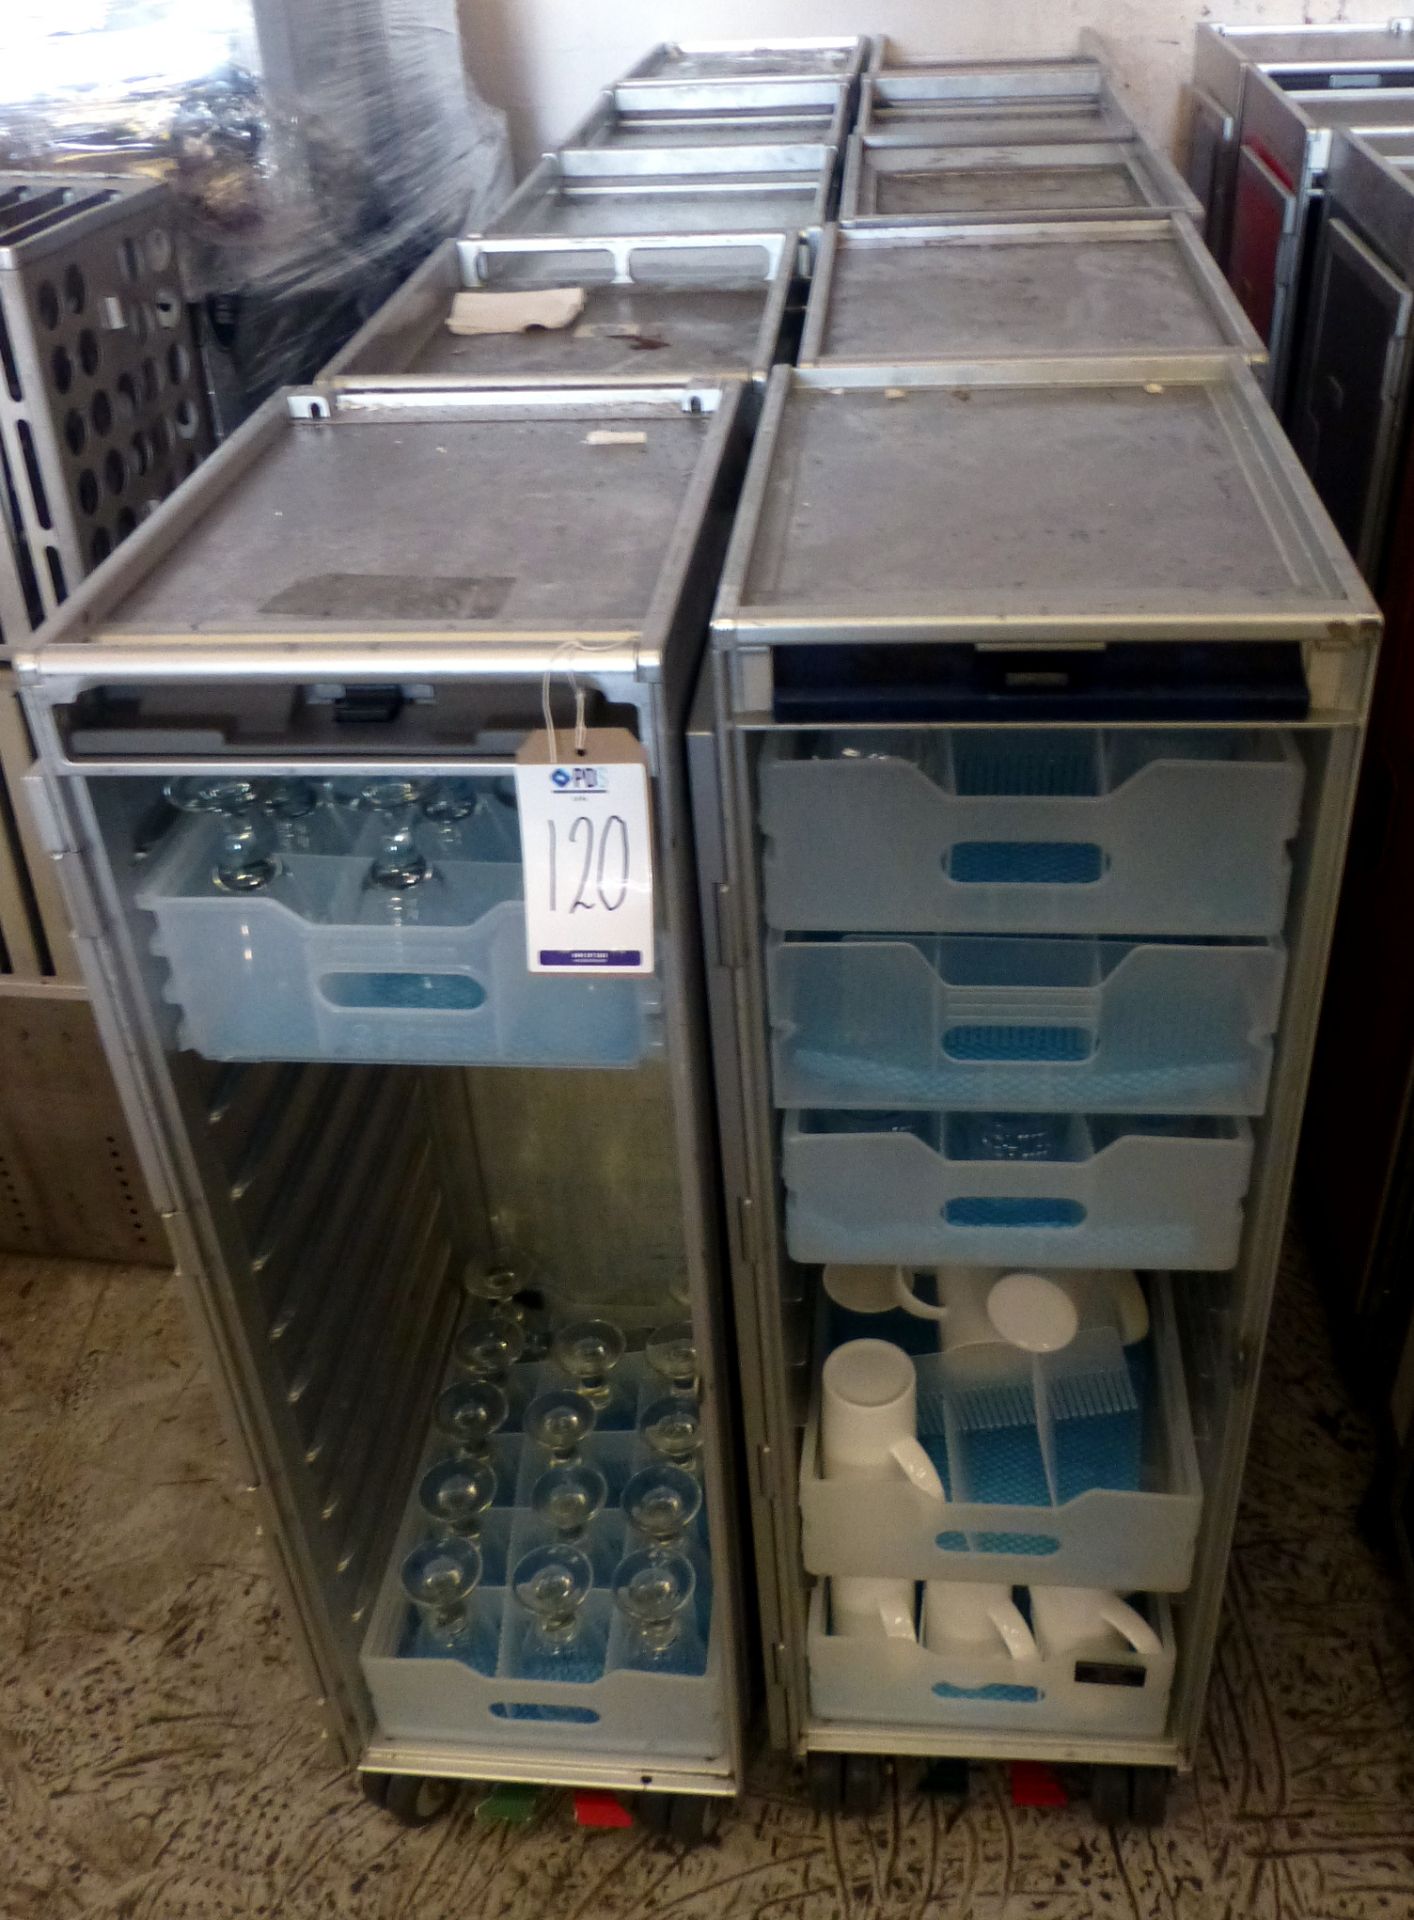 10 Assorted Half Size Galley Carts 30cm x 40cm x 103cm & Contents Mainly Wine Glasses & Crockery (